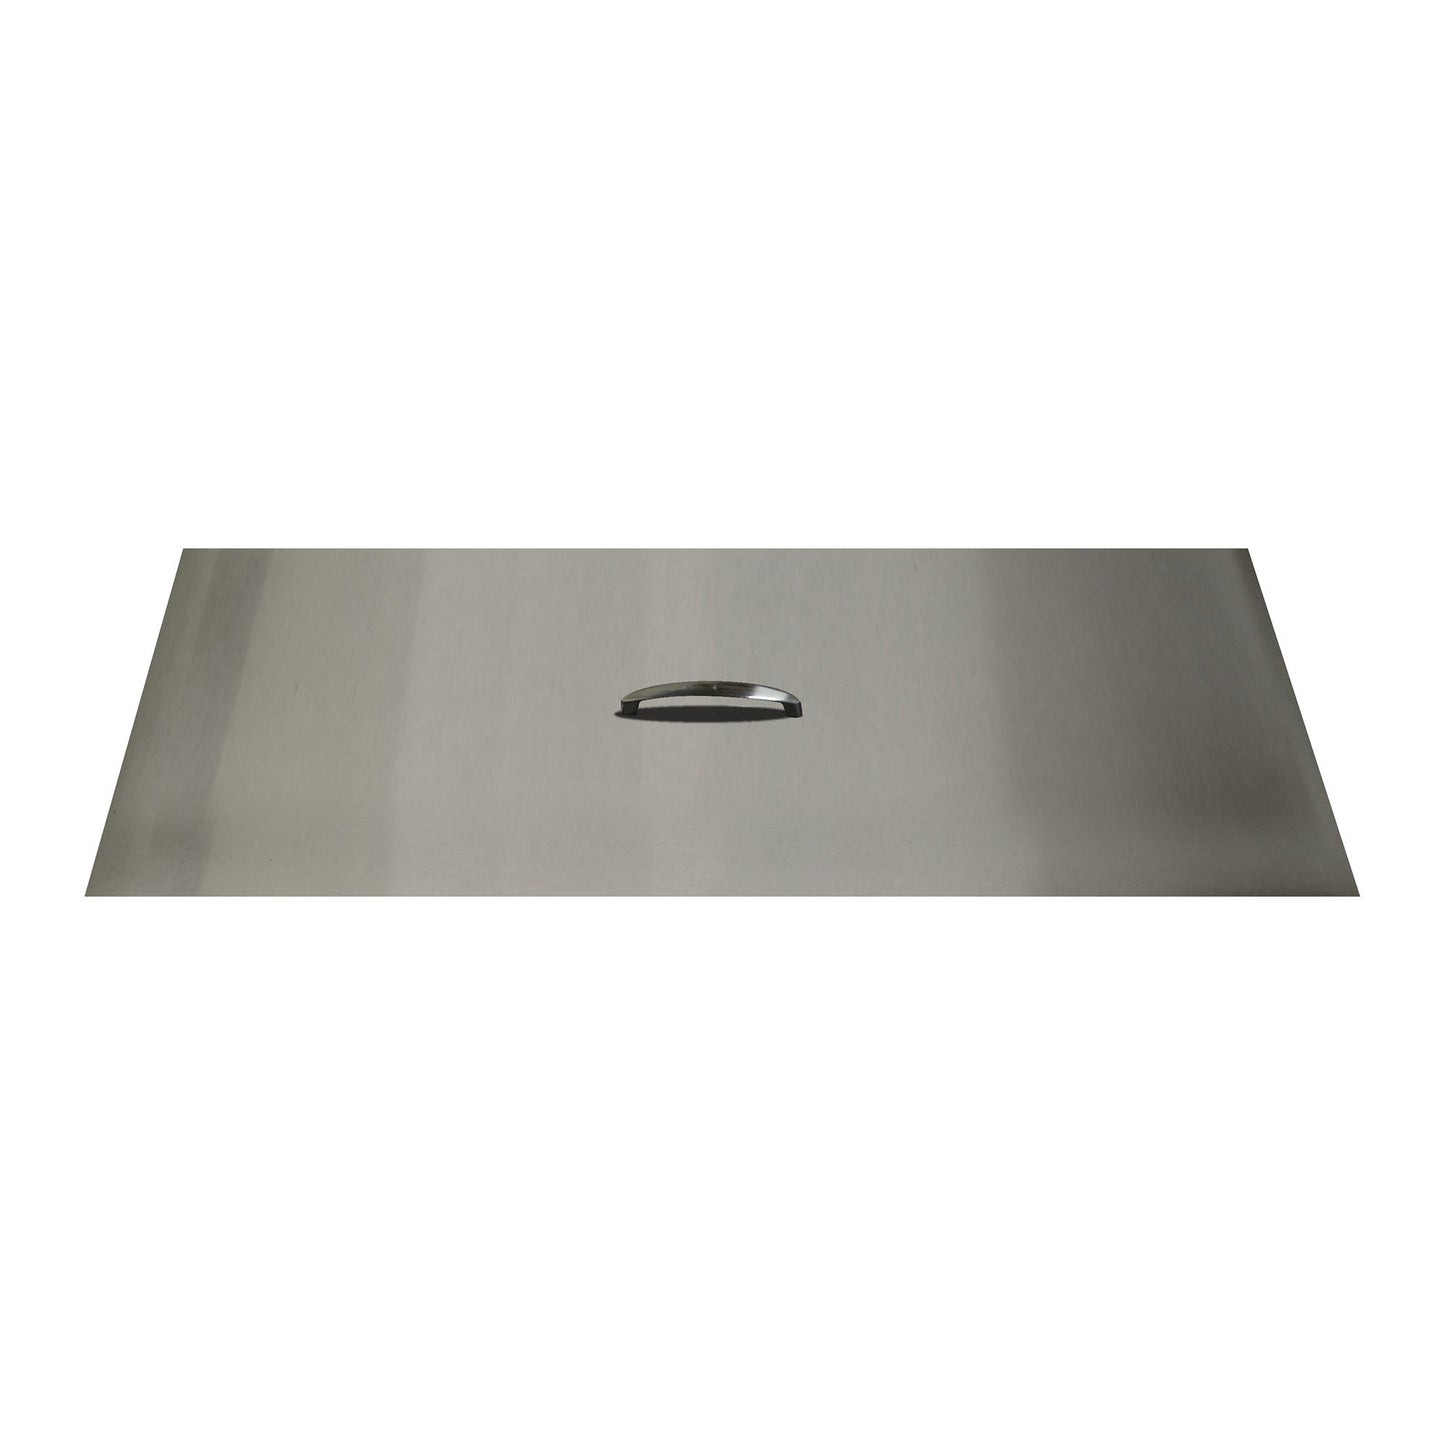 The Outdoor Plus 37" x 21" Stainless Steel Rectangular Fire Pit Lid Cover